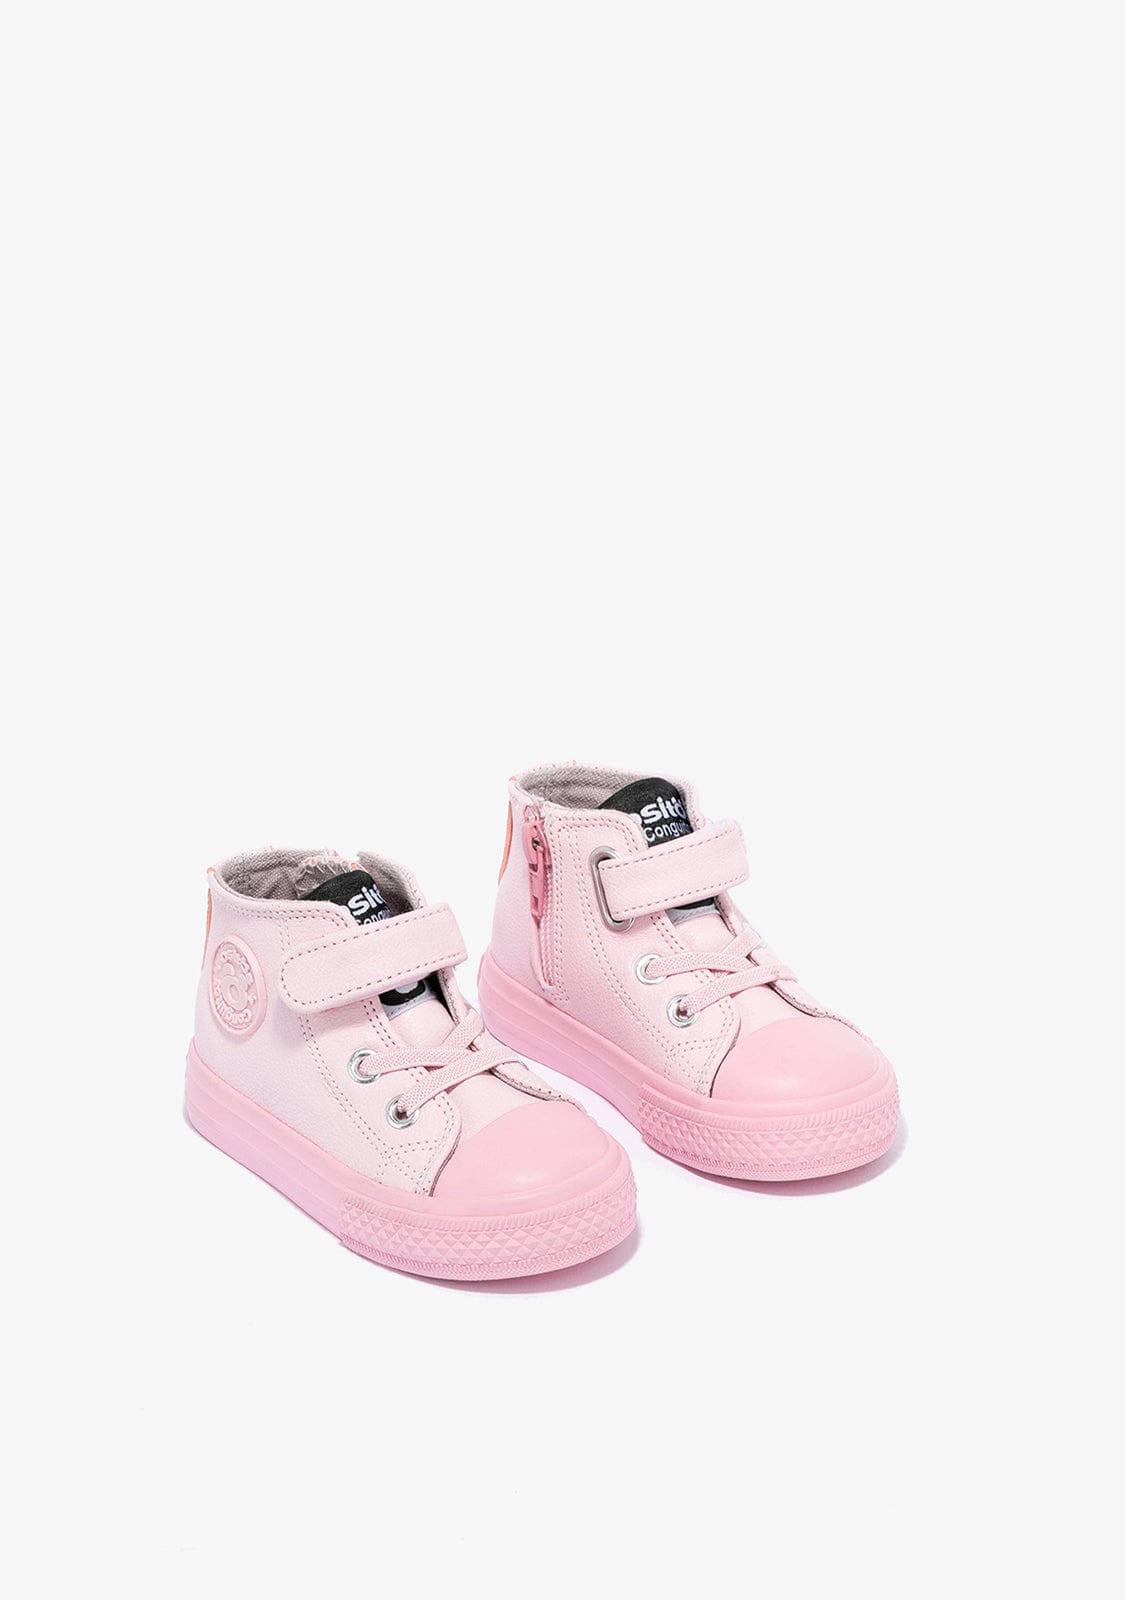 OSITO Shoes Baby's Color Block Pink Hi-Top Sneakers